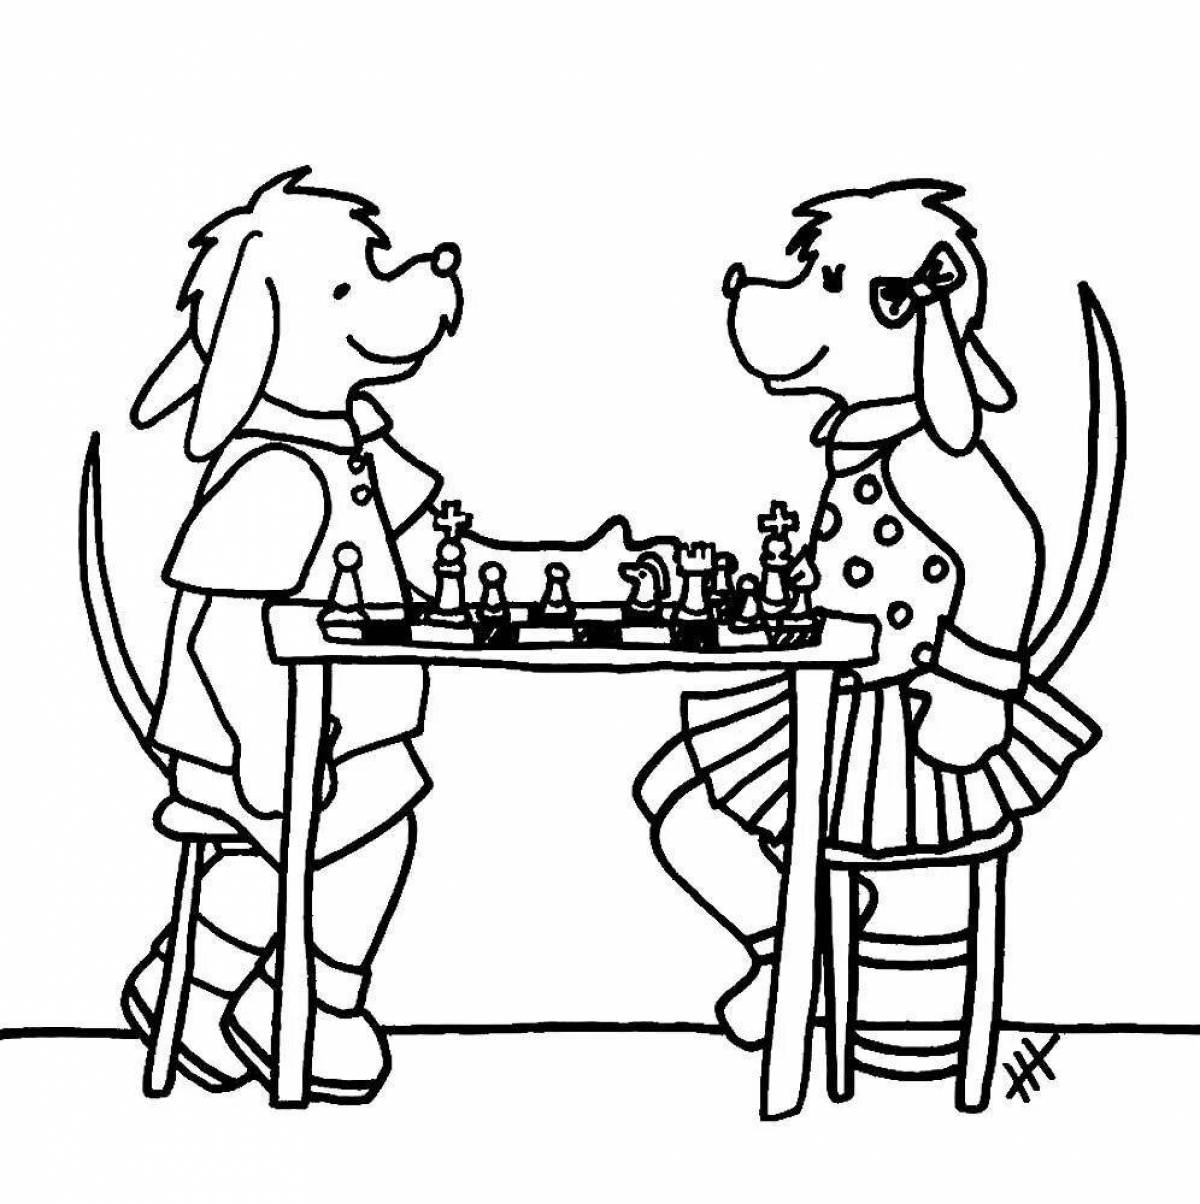 Colorful chess coloring book for little kids